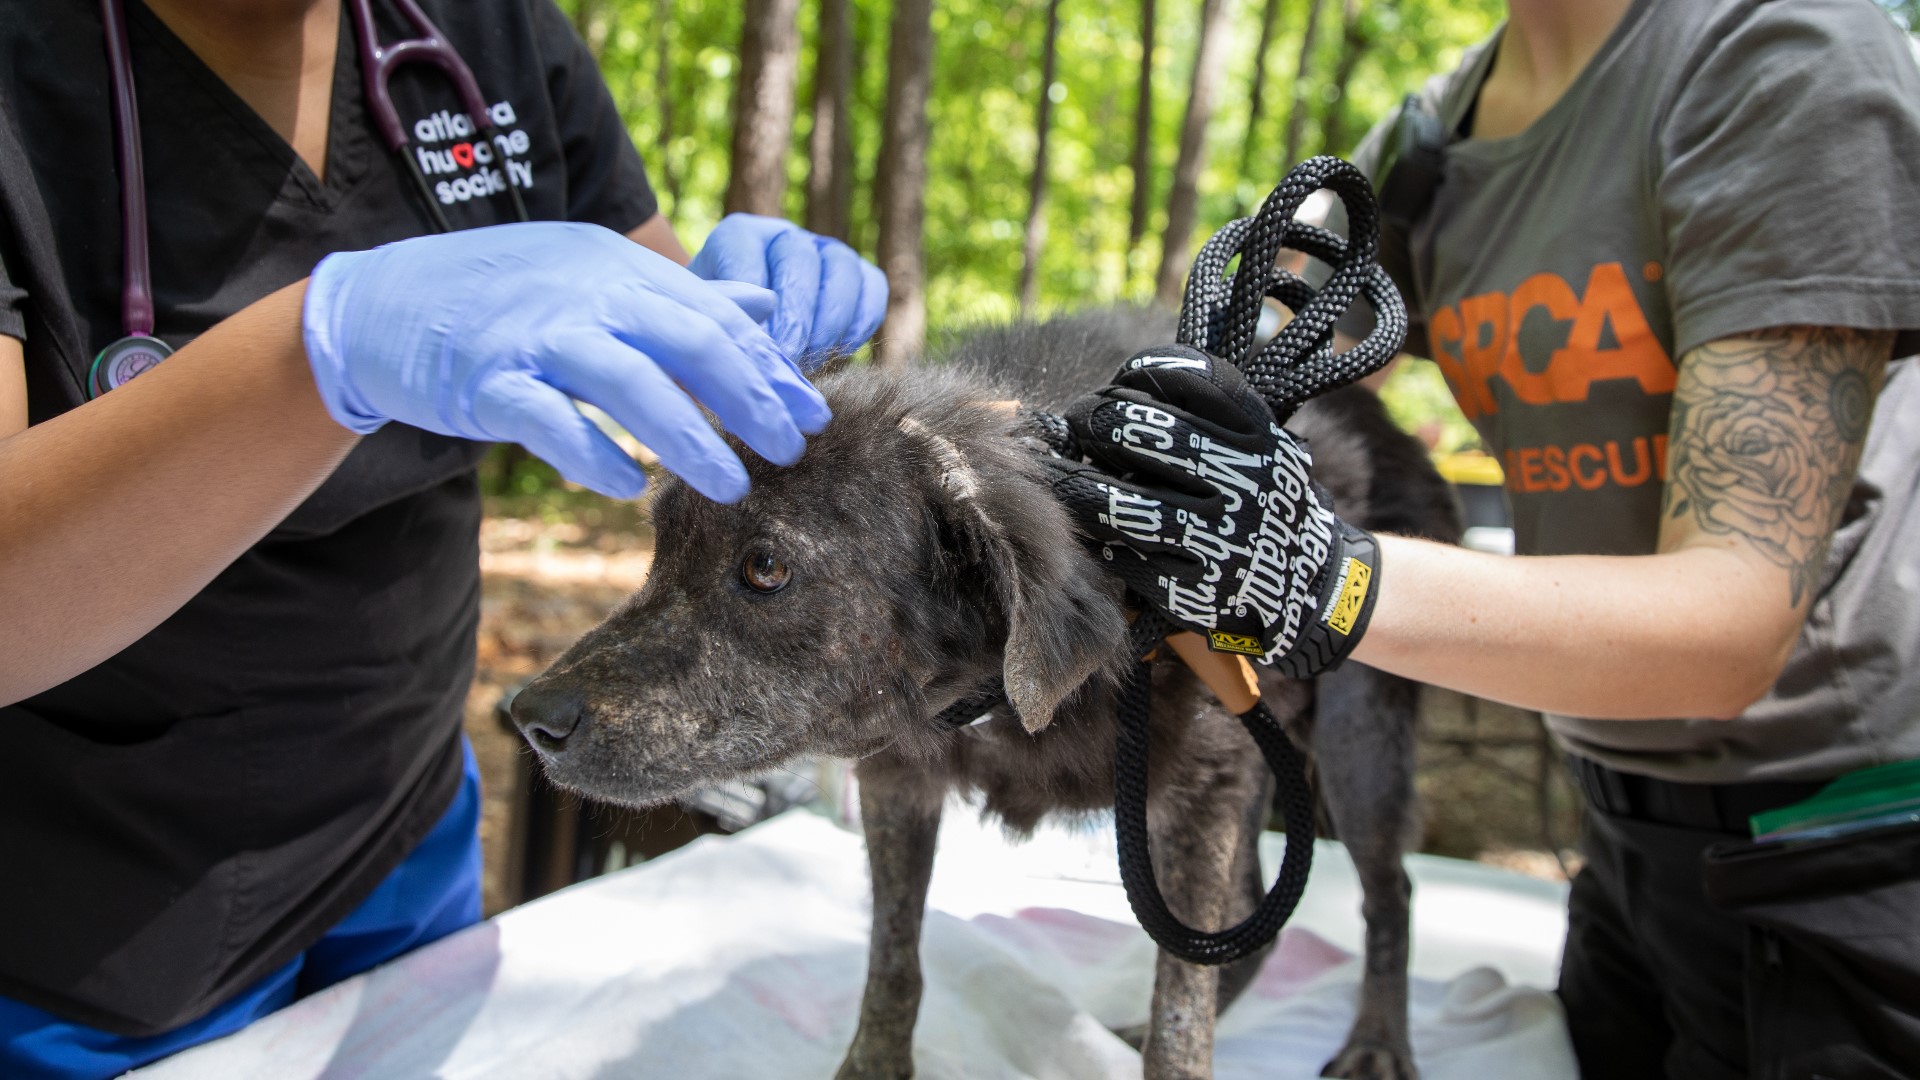 The Atlanta Humane Society said many of the dogs will require medical and behavioral care. Courtesy: Atlanta Humane Society